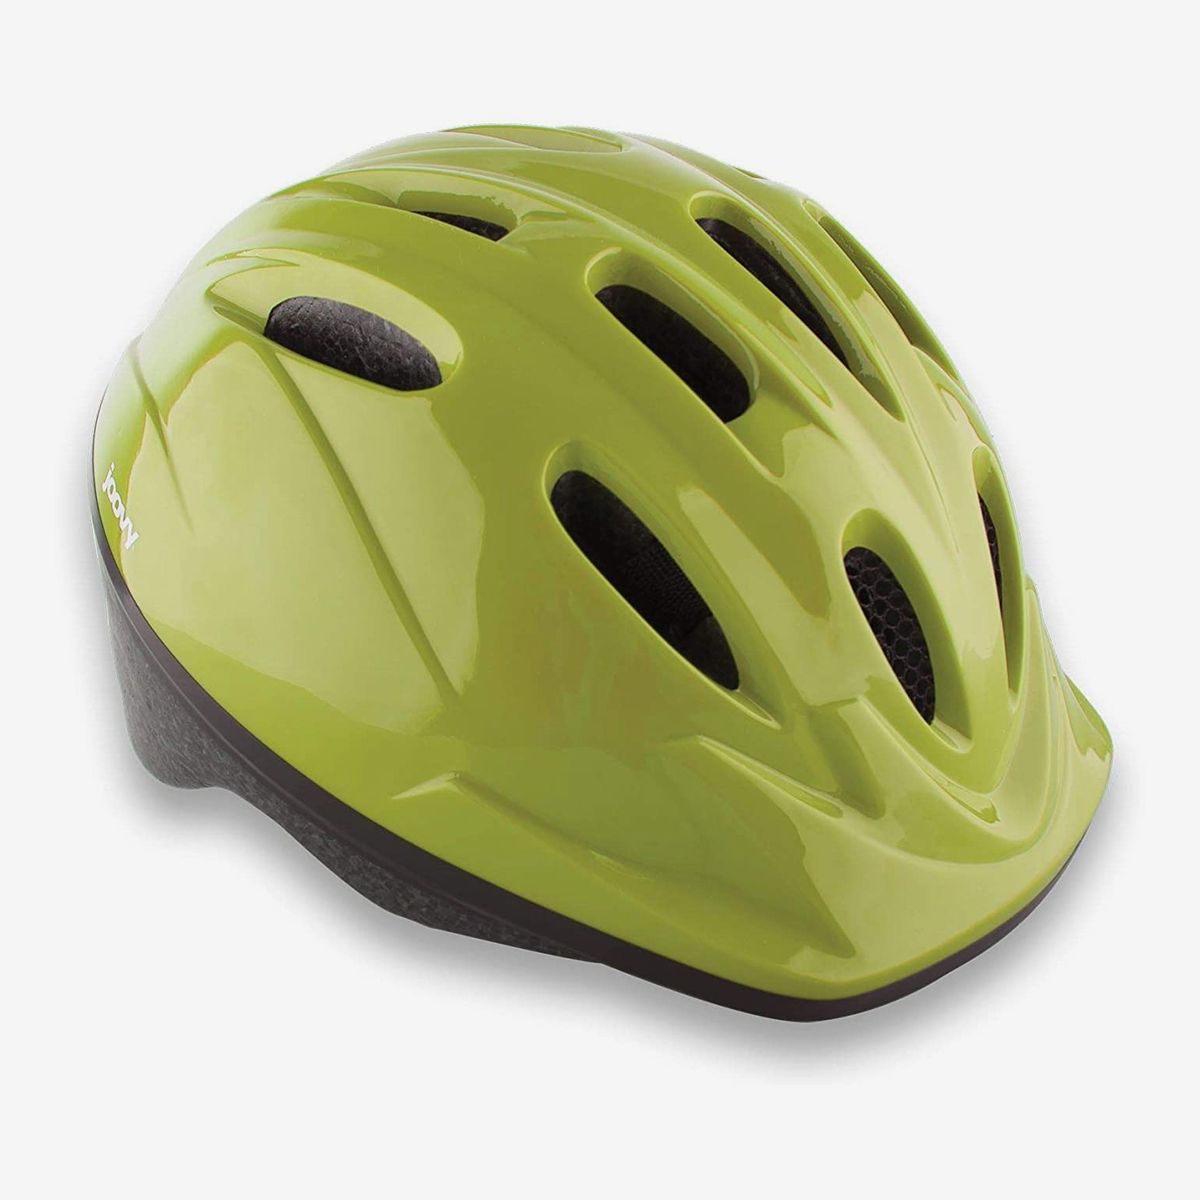 helmet for 6 year old